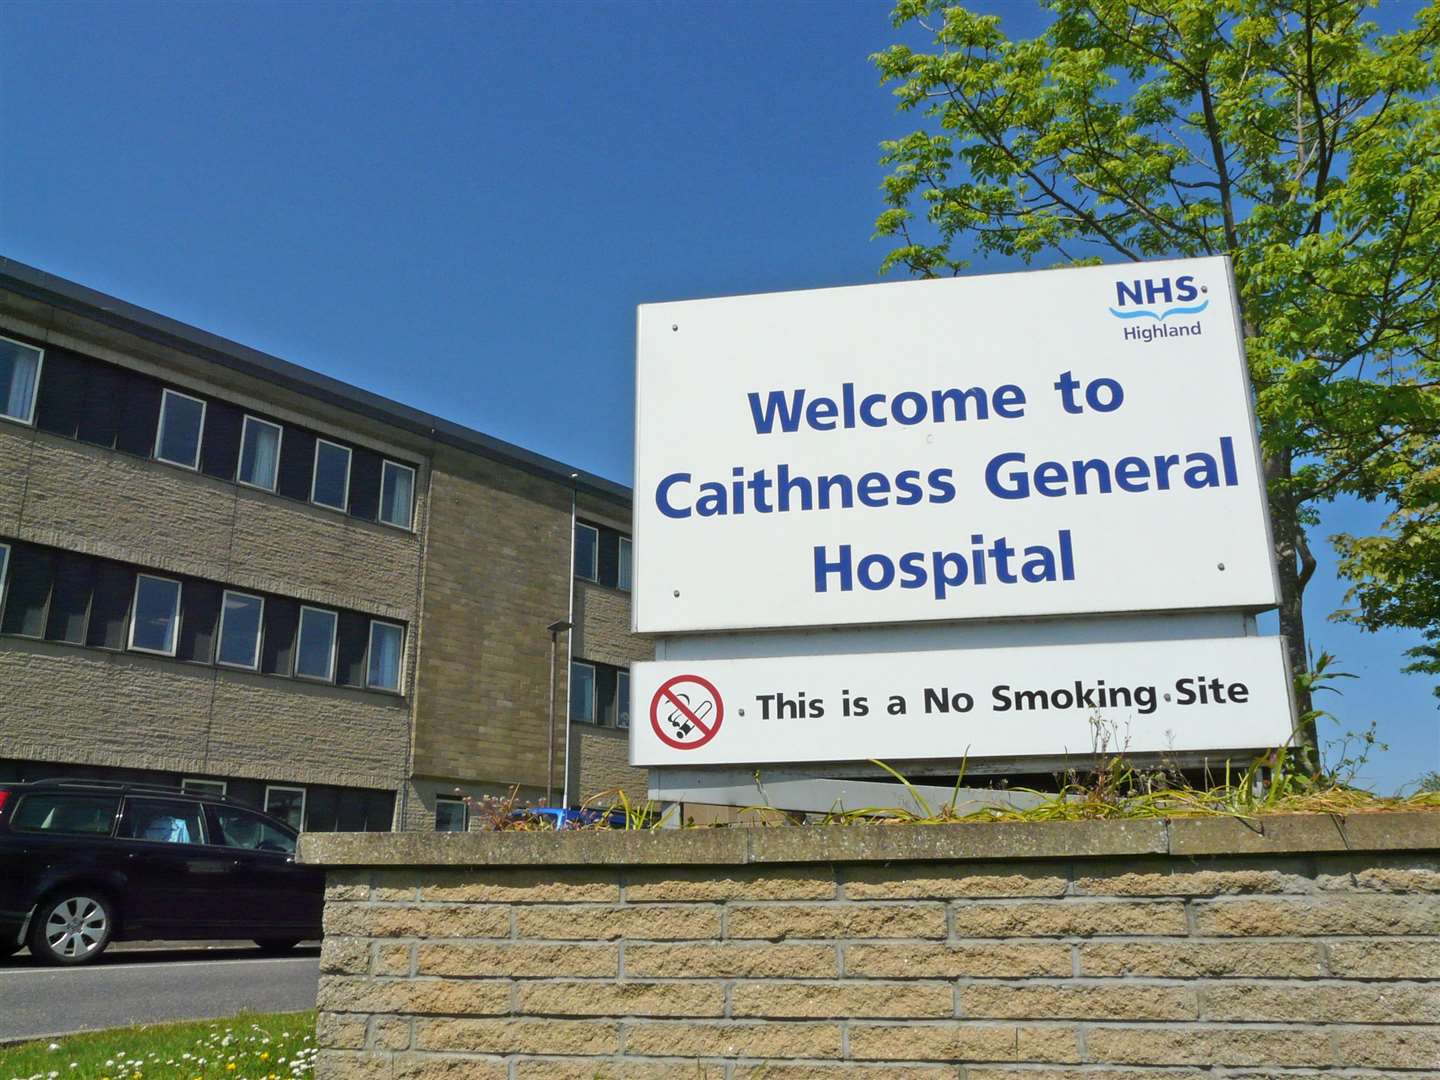 Under the plan investment would be made in Caithness General Hospital.